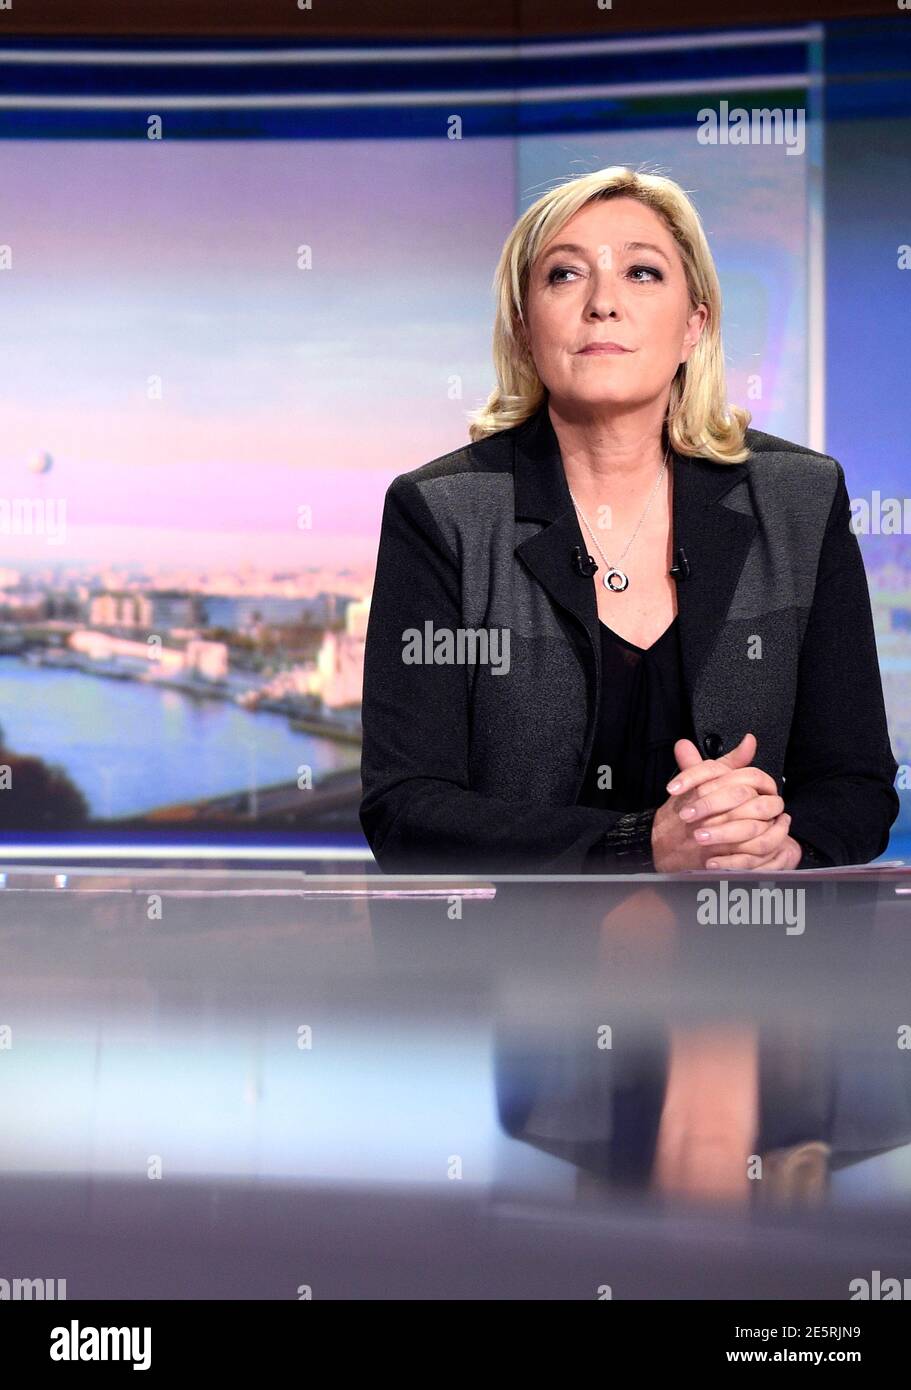 France's far-right National Front political party leader Marine Le Pen  waits before TF1 television evening news programme in Boulogne-Billancourt,  near Paris April 9, 2015. A bitter family feud between National Front leader